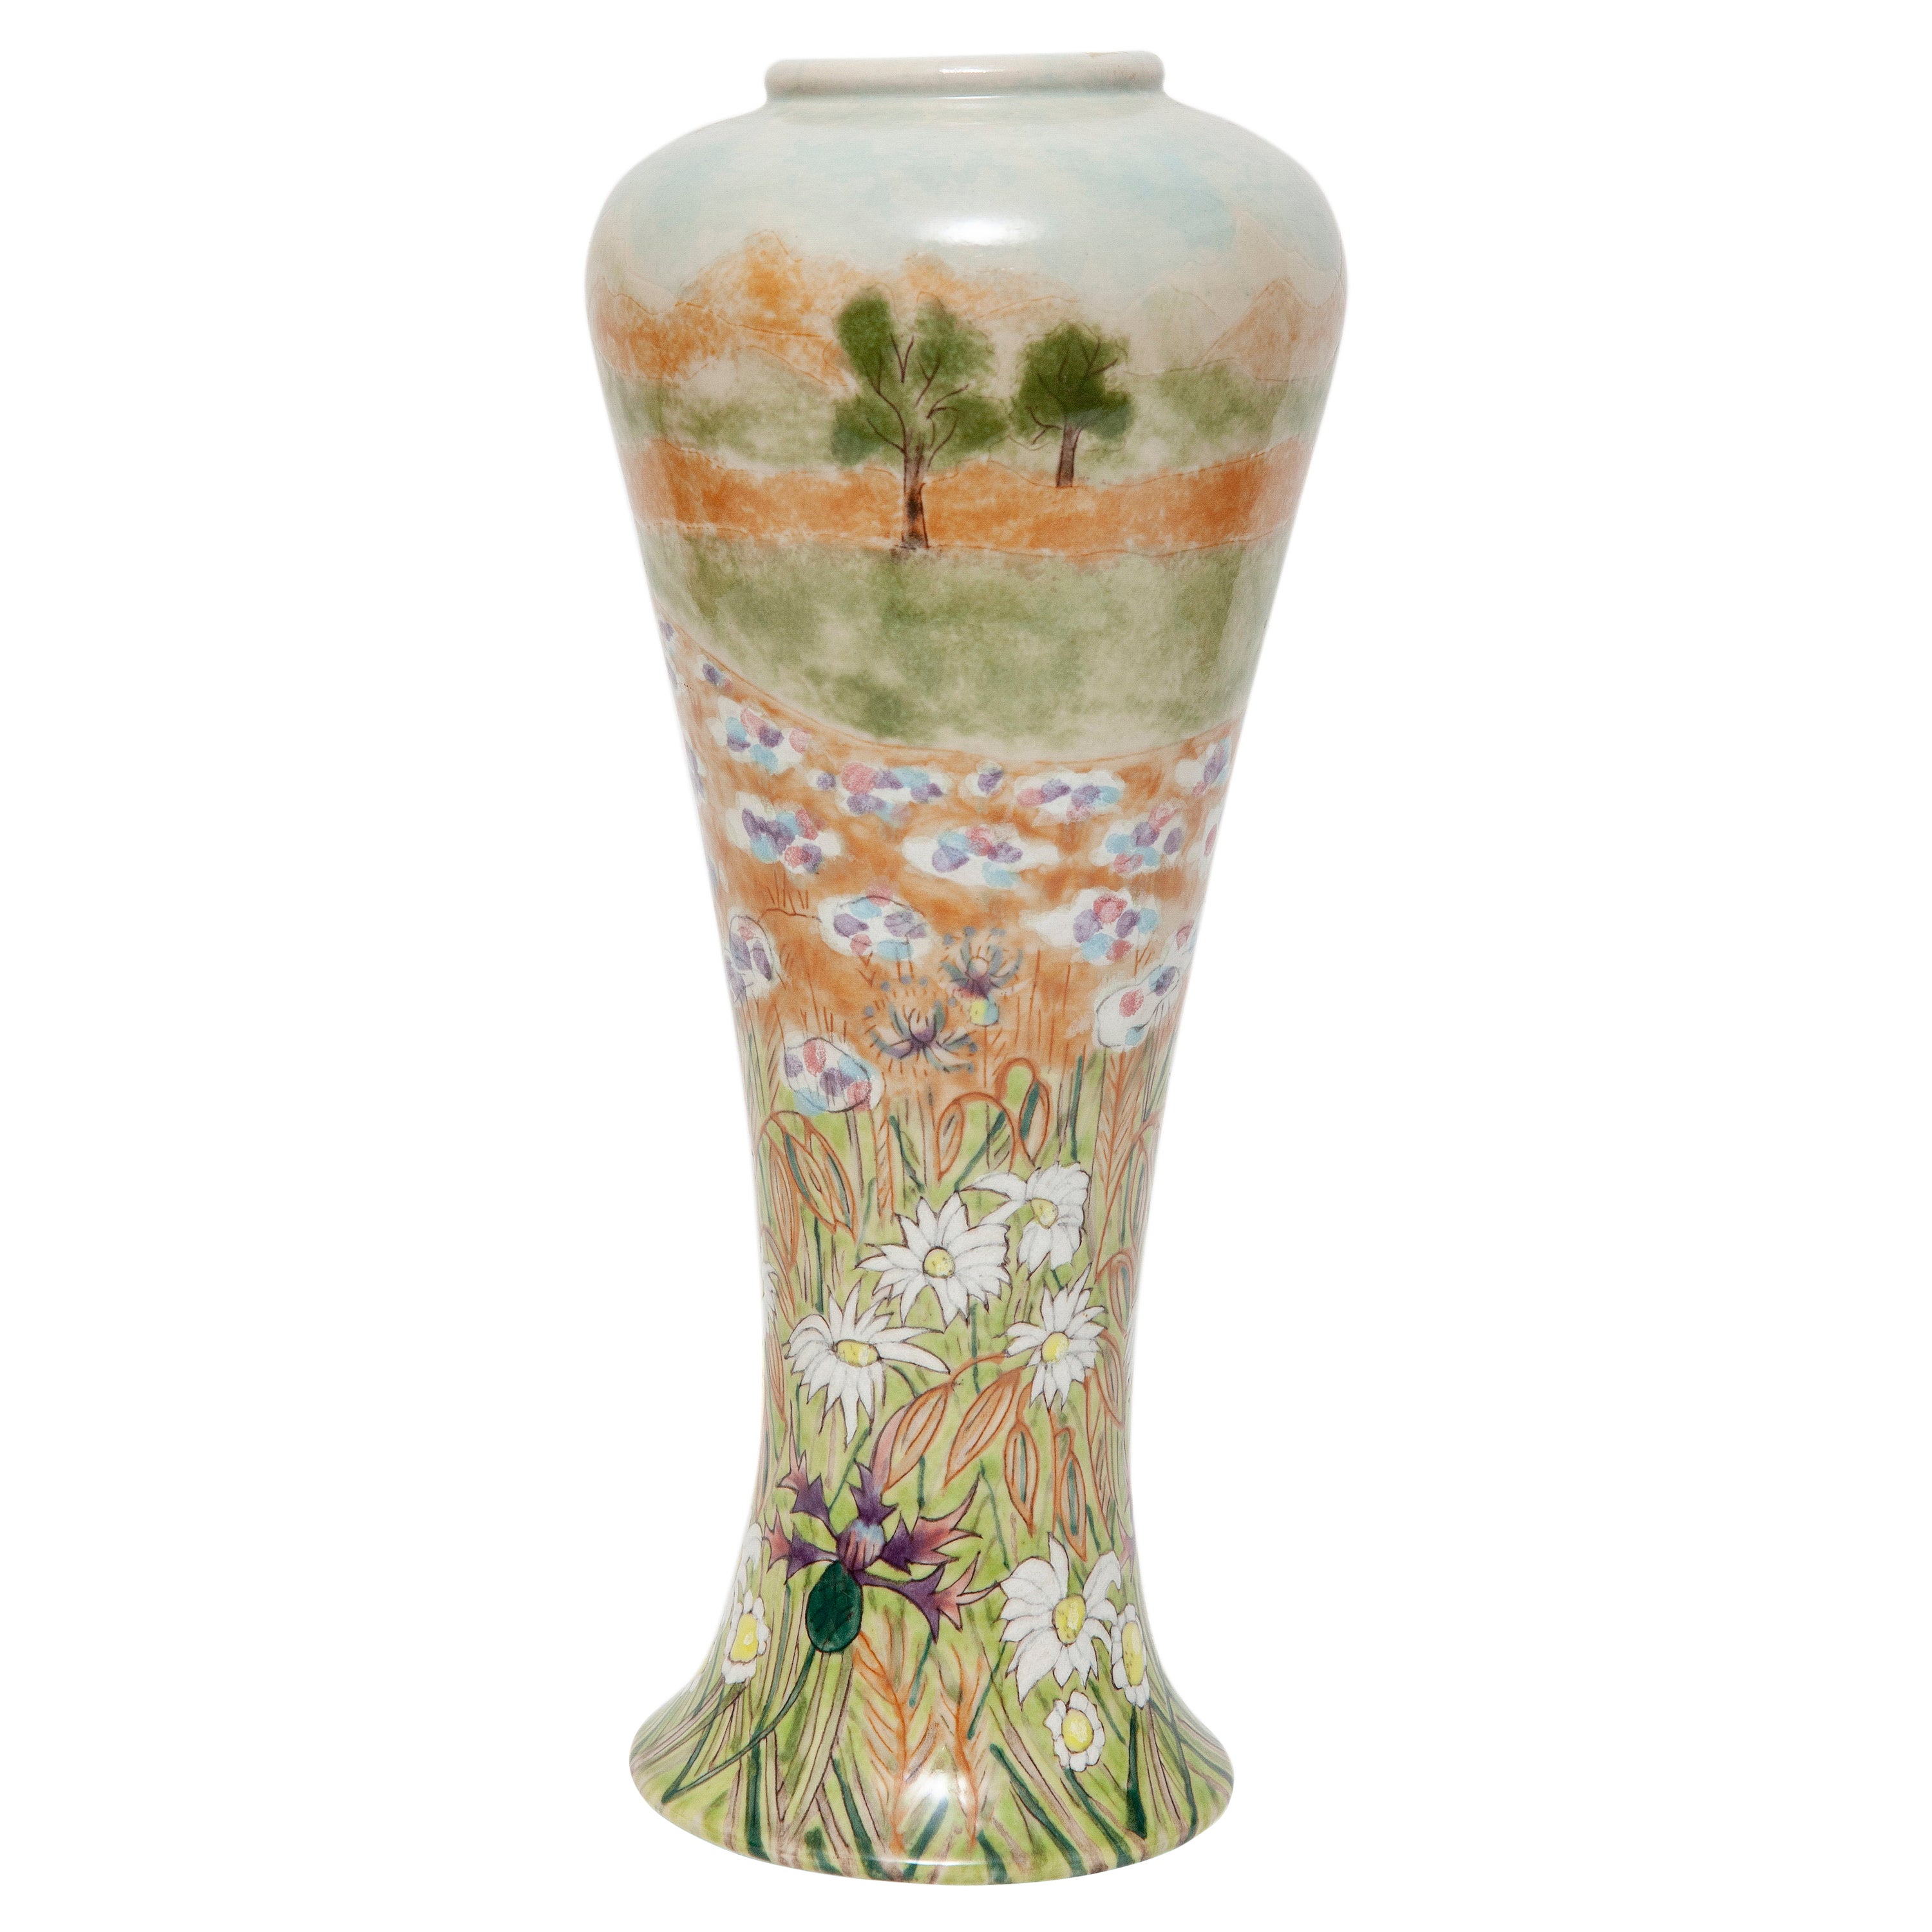 vase Cobridge summer meadow limited edition 28/250 daisy's 10" high For Sale